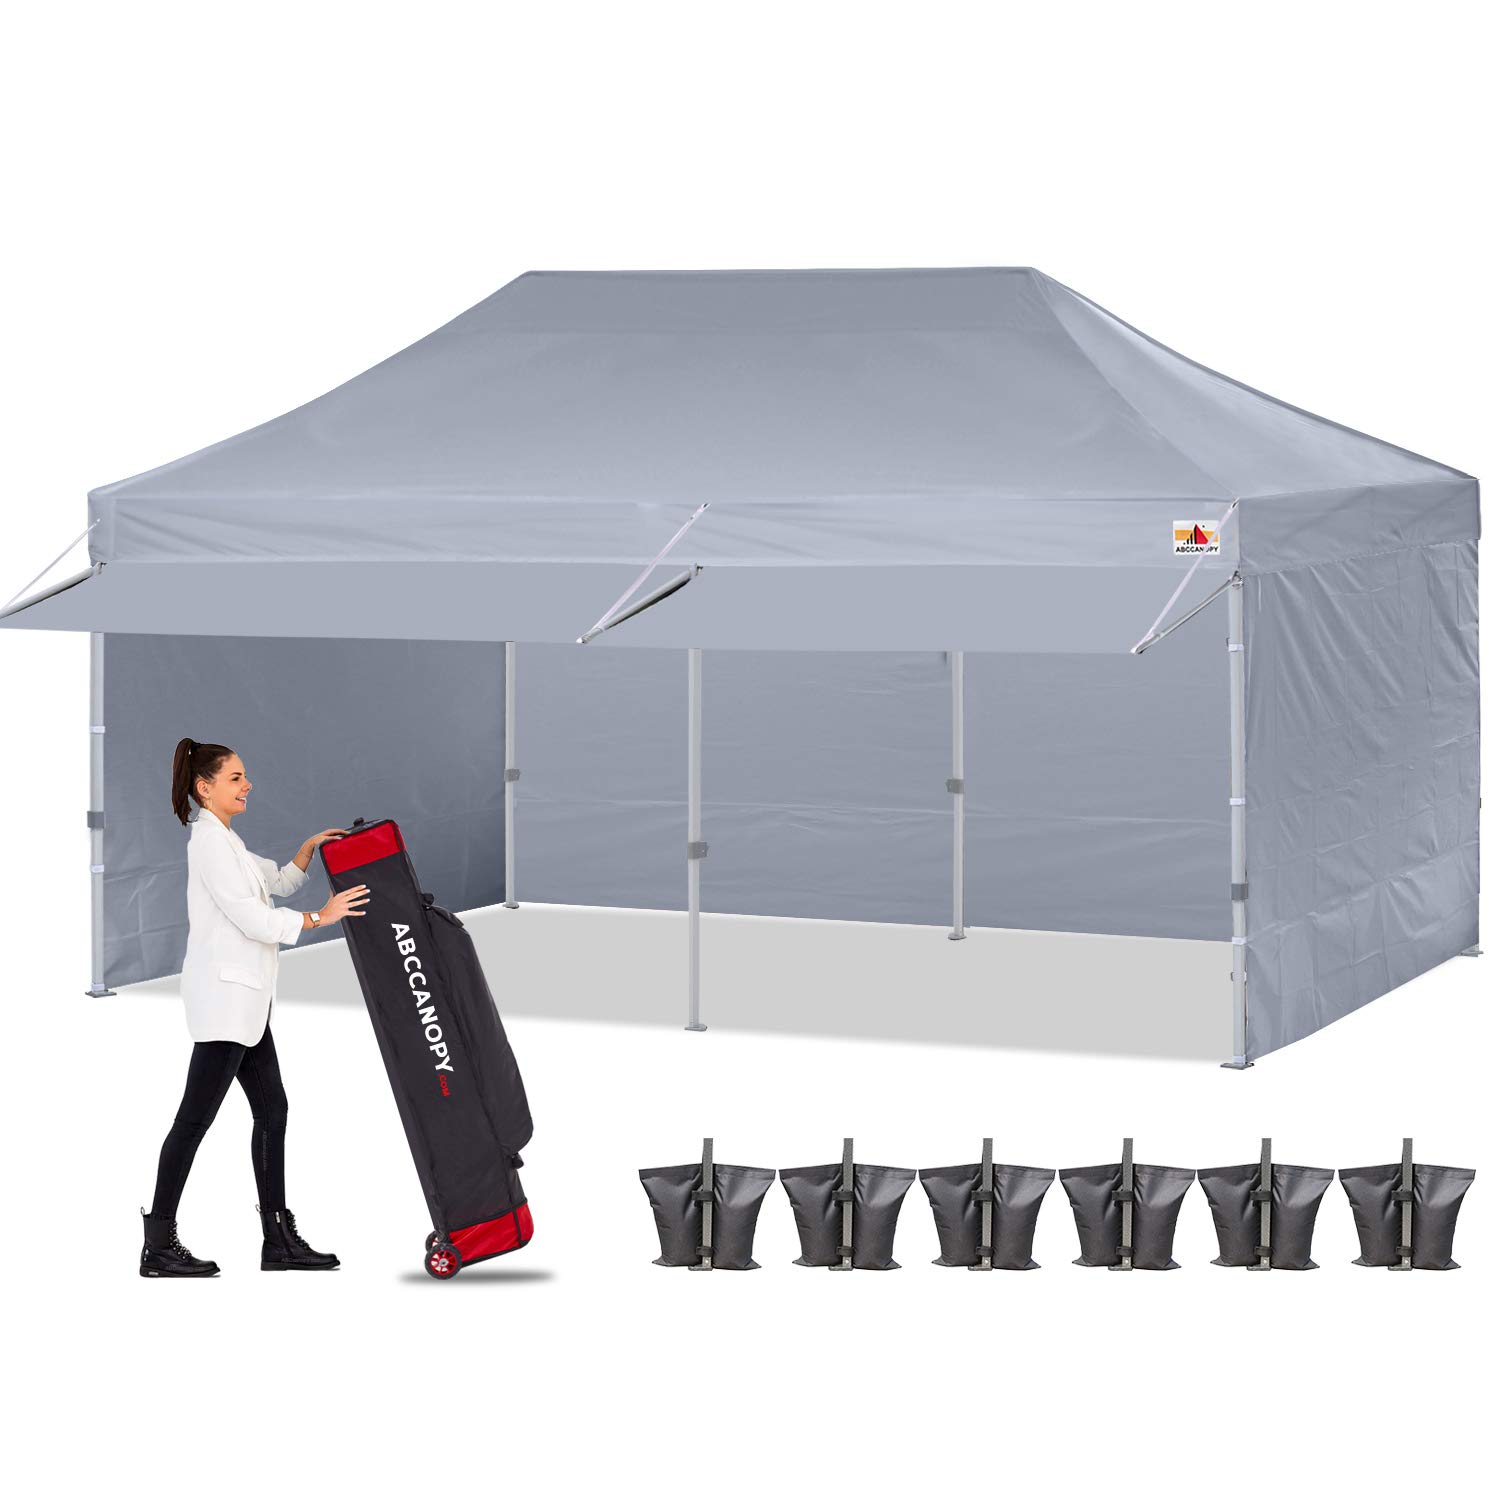 Abccanopy Ez Pop Up Canopy Tent With Awning And Sidewalls 10X20 Market -Series, Gray